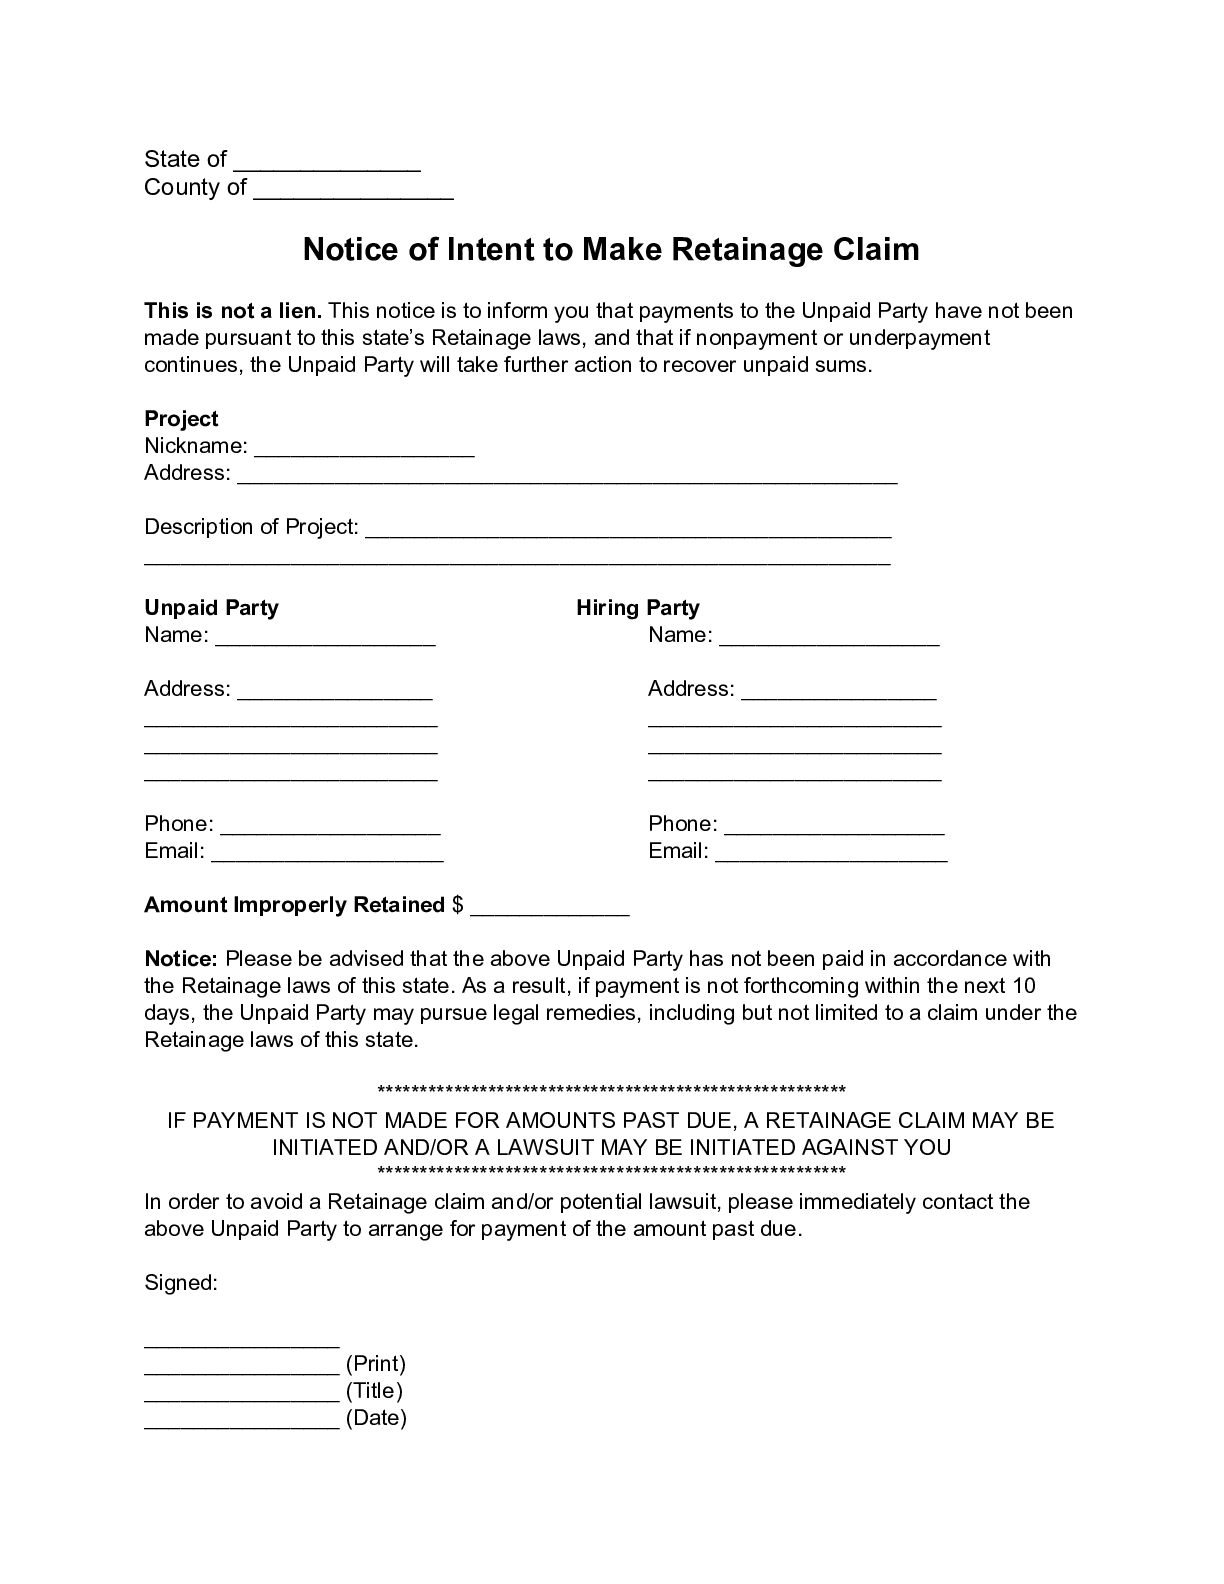 Notice of Intent to Make Retainage Claim Form - free from